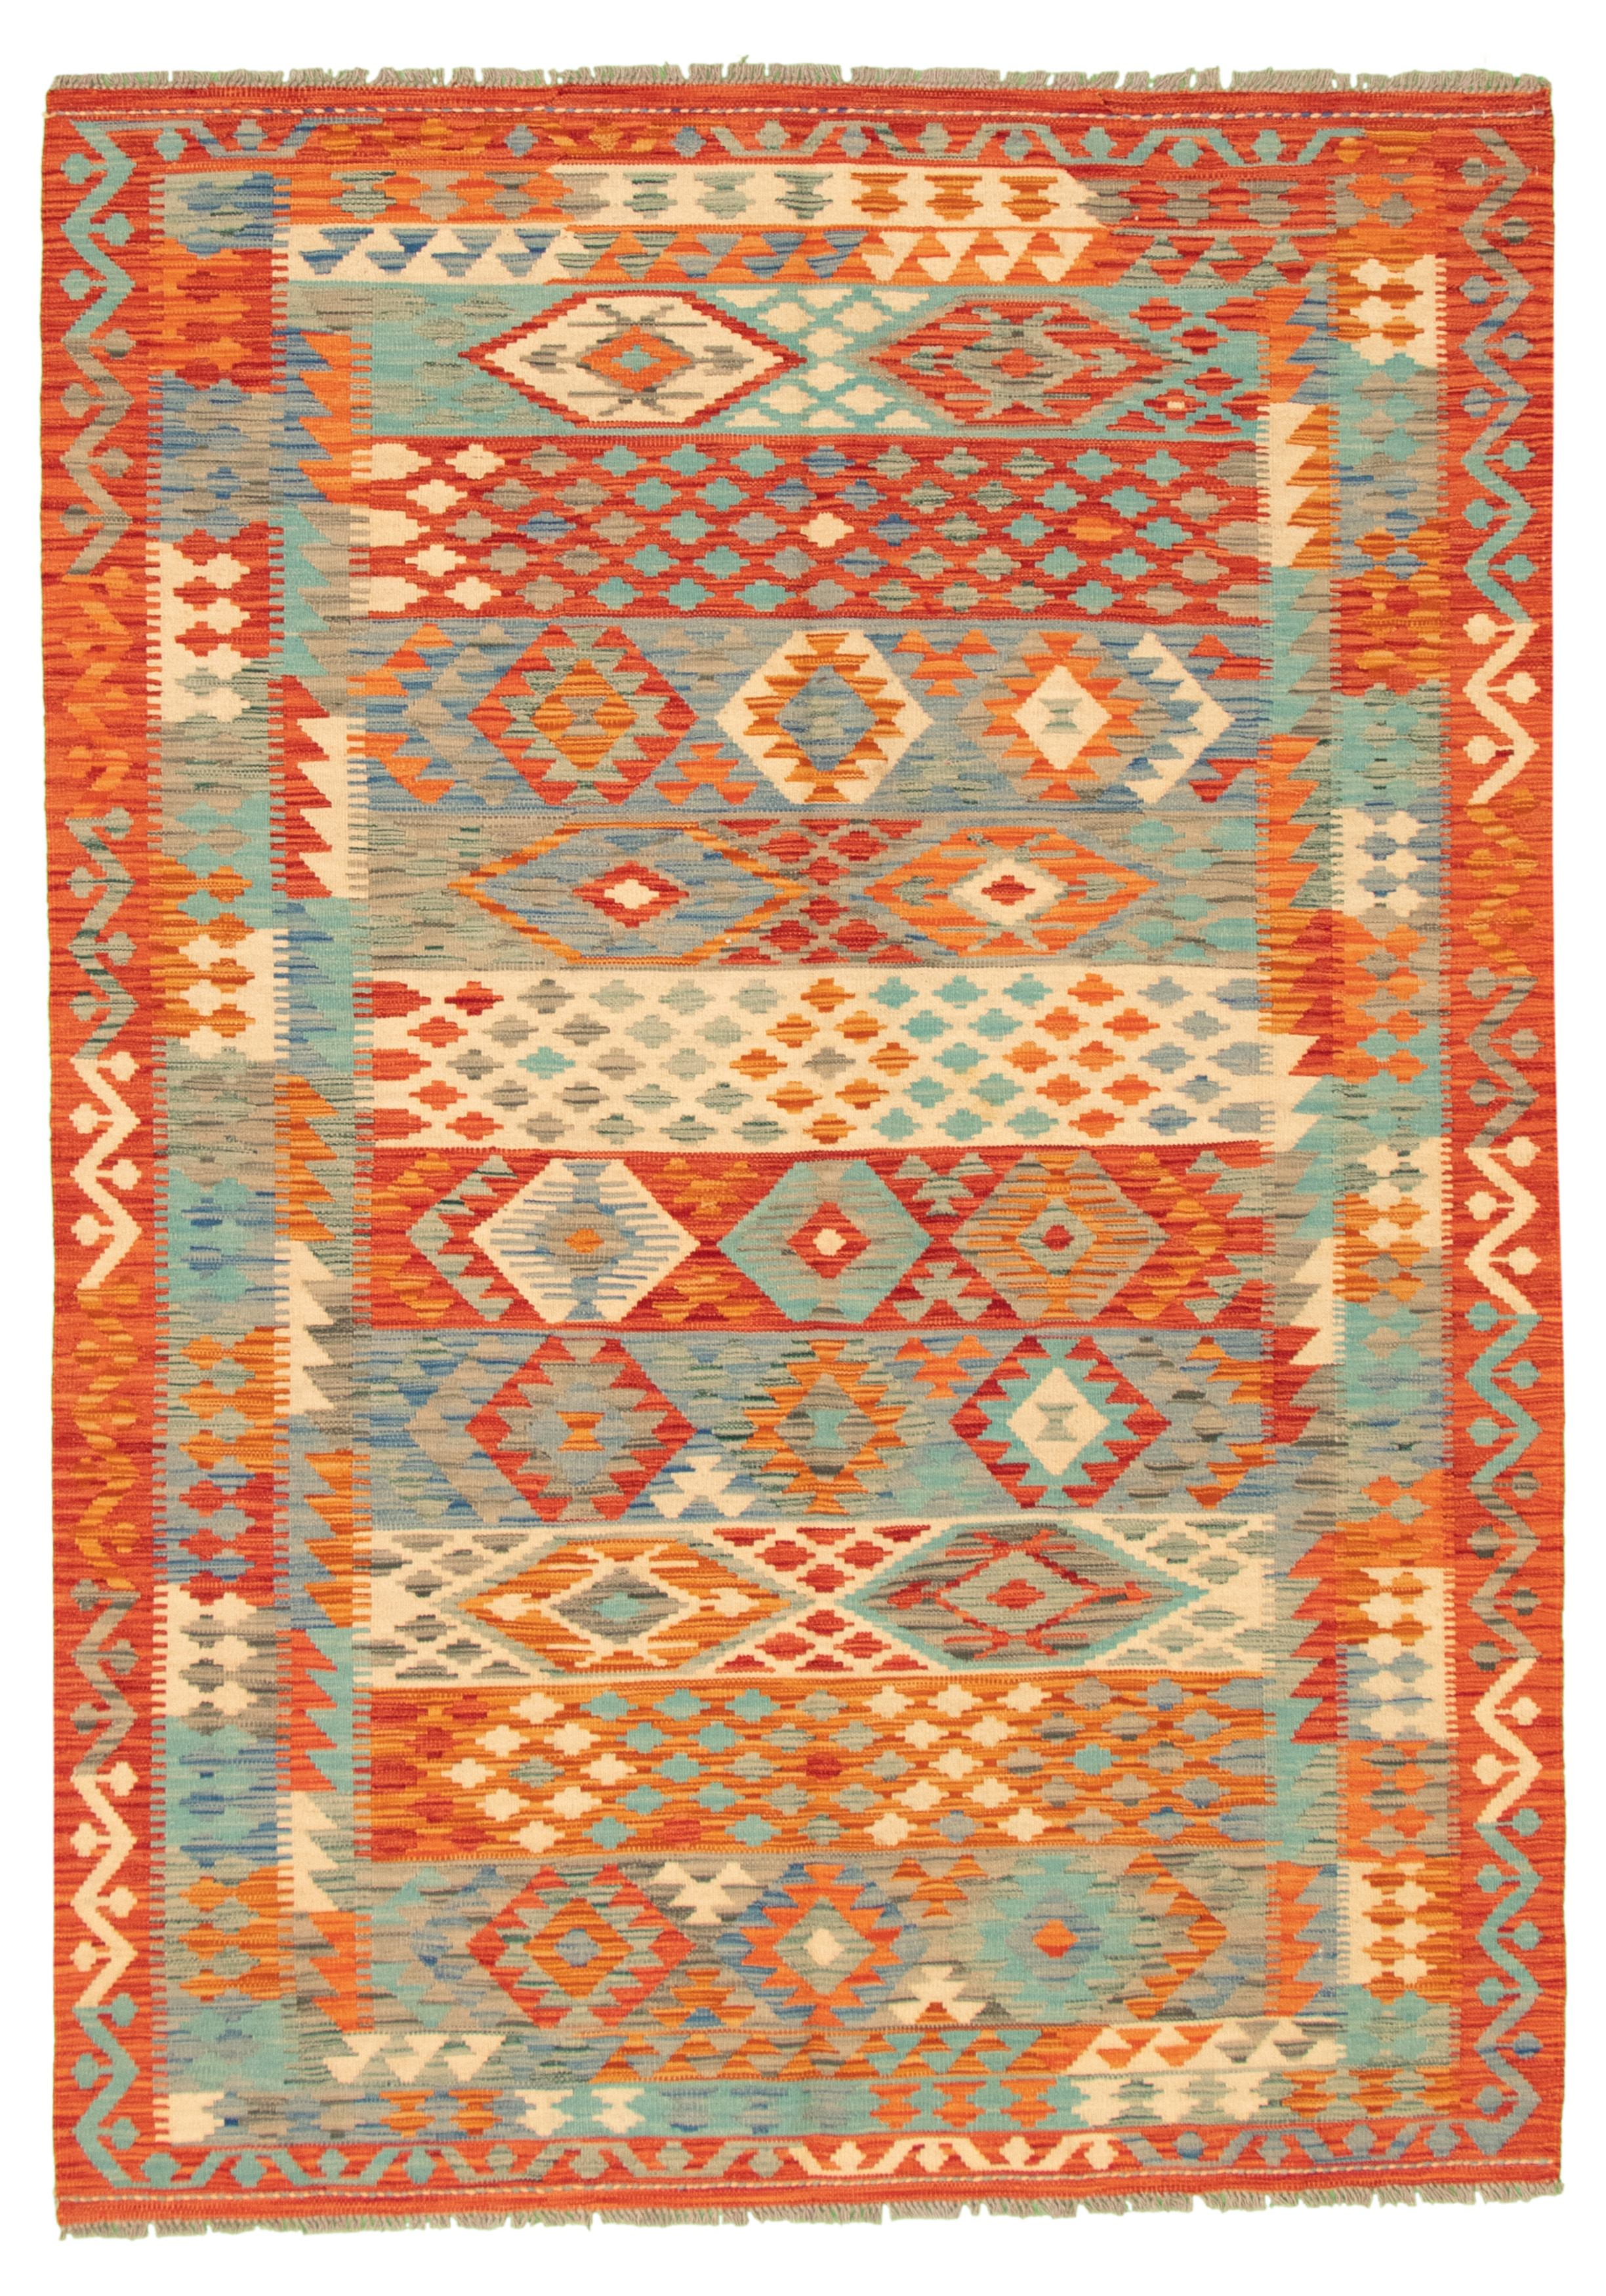 Hand woven Bold and Colorful  Red Wool Kilim 5'7" x 7'10" Size: 5'7" x 7'10"  